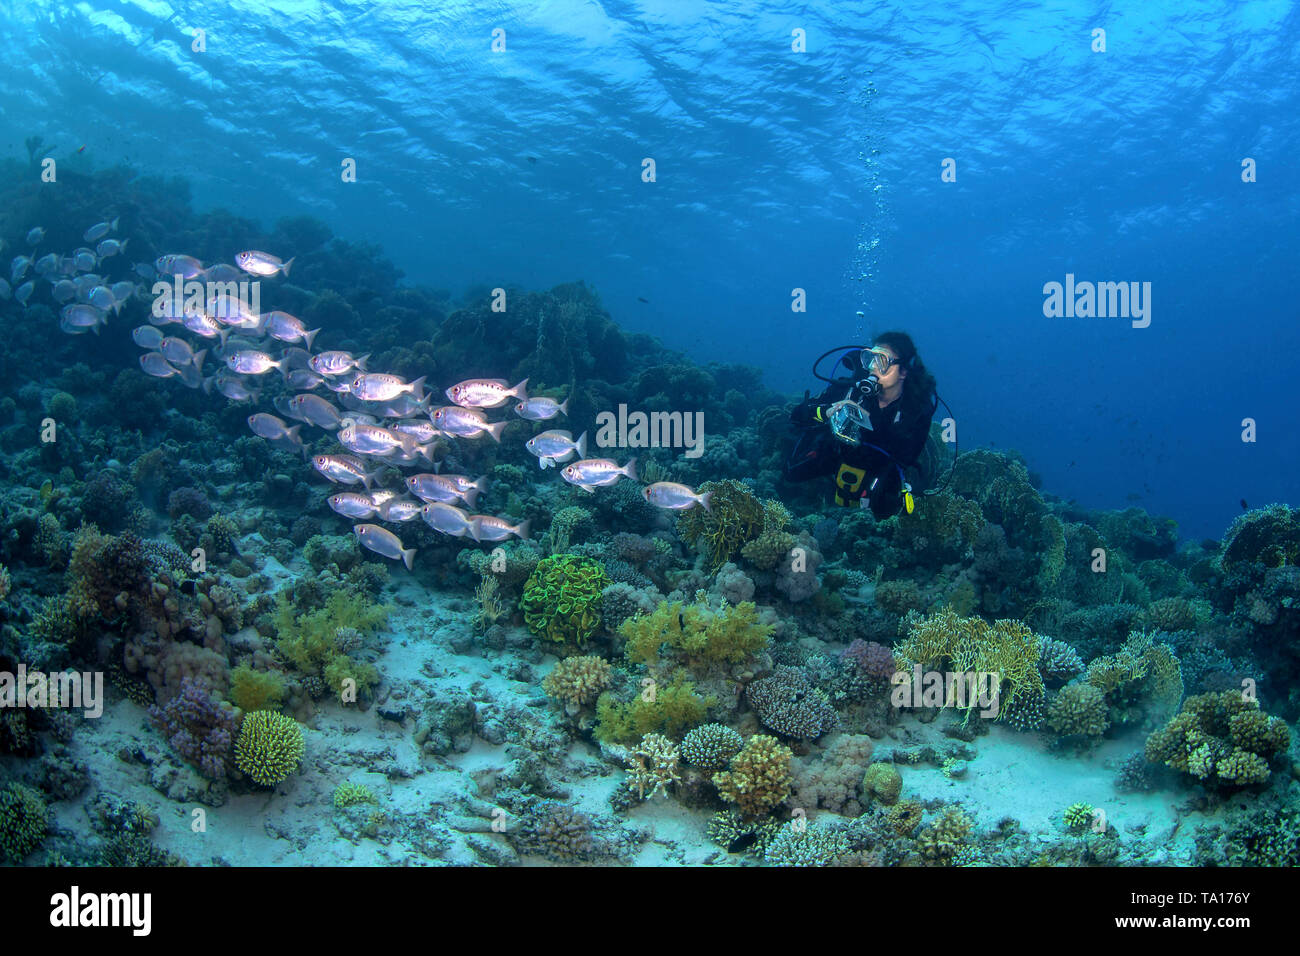 Female scuba diver photographs school of big-eyed soldierfish on a coral reef in the Northern Red Sea off the coast of Egypt. Stock Photo